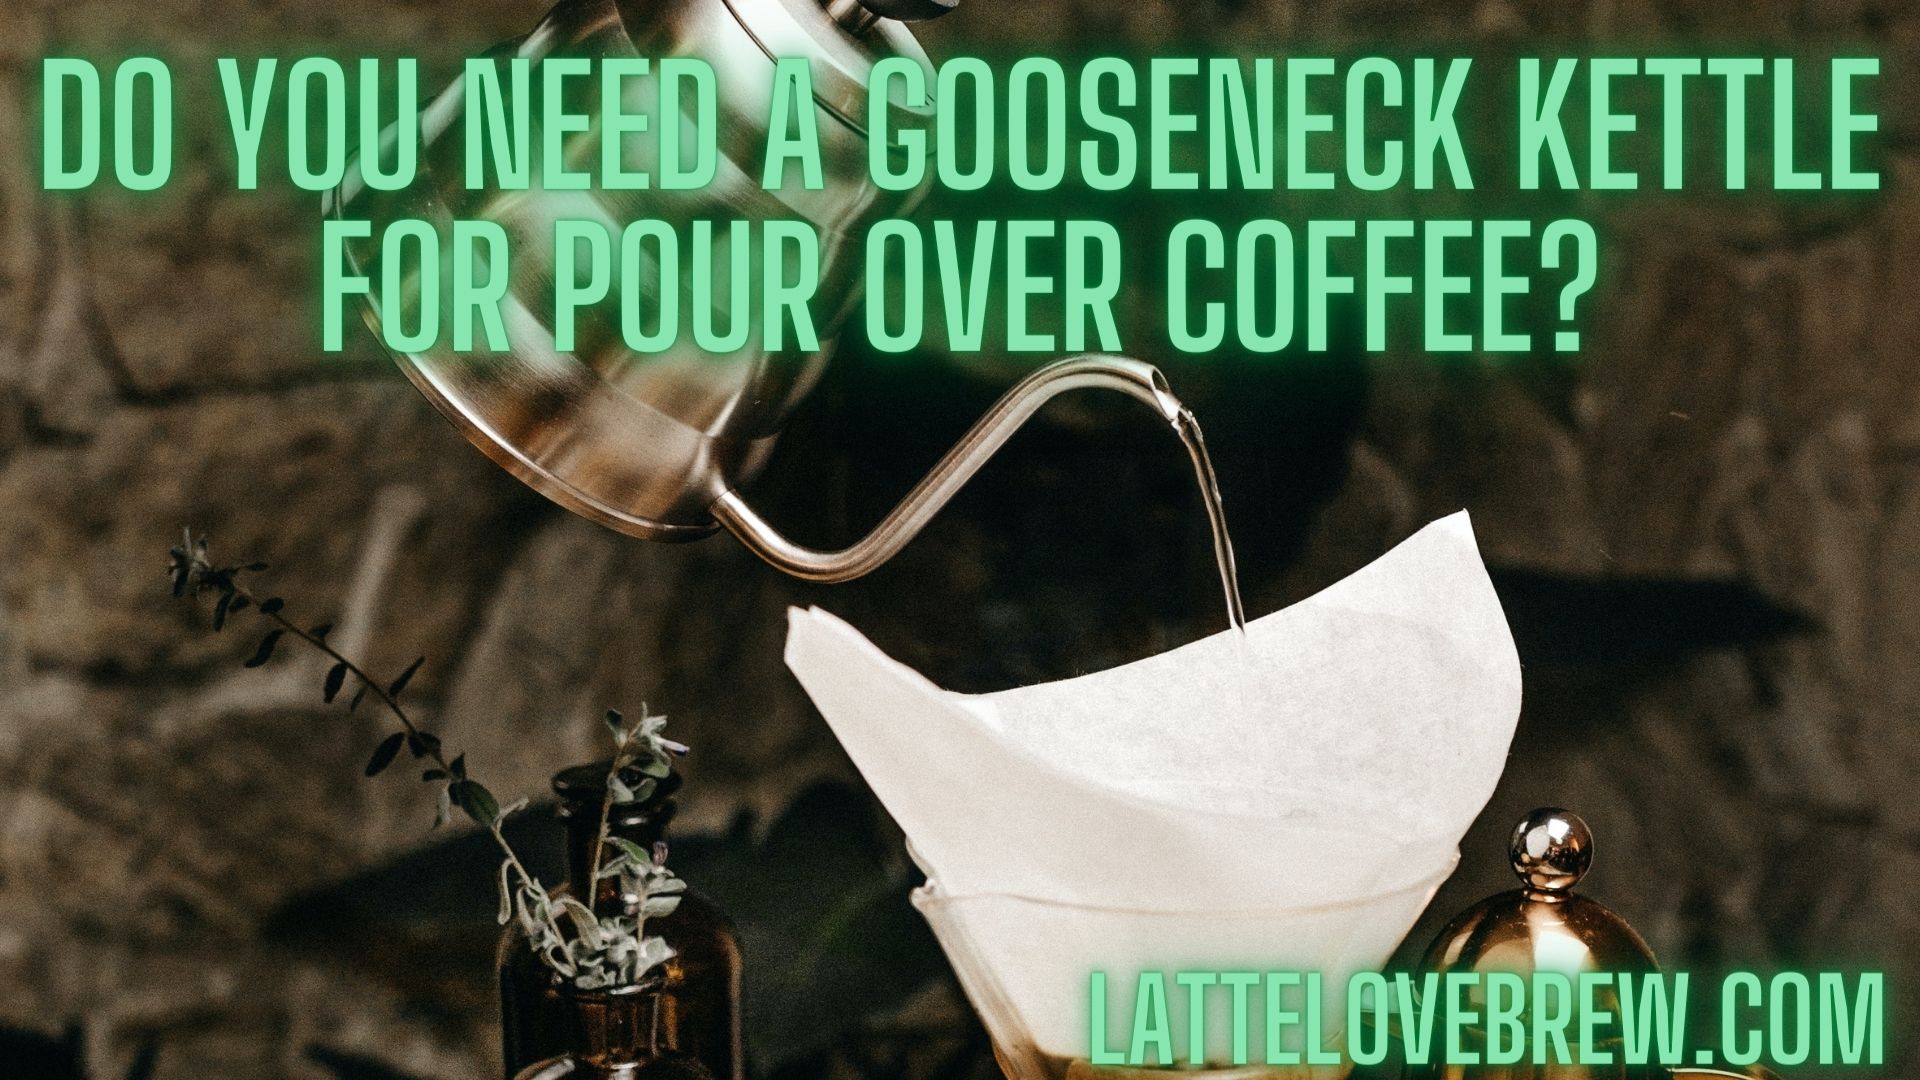 https://lattelovebrew.com/wp-content/uploads/2021/10/Do-You-Need-A-Gooseneck-Kettle-For-Pour-Over-Coffee.jpg